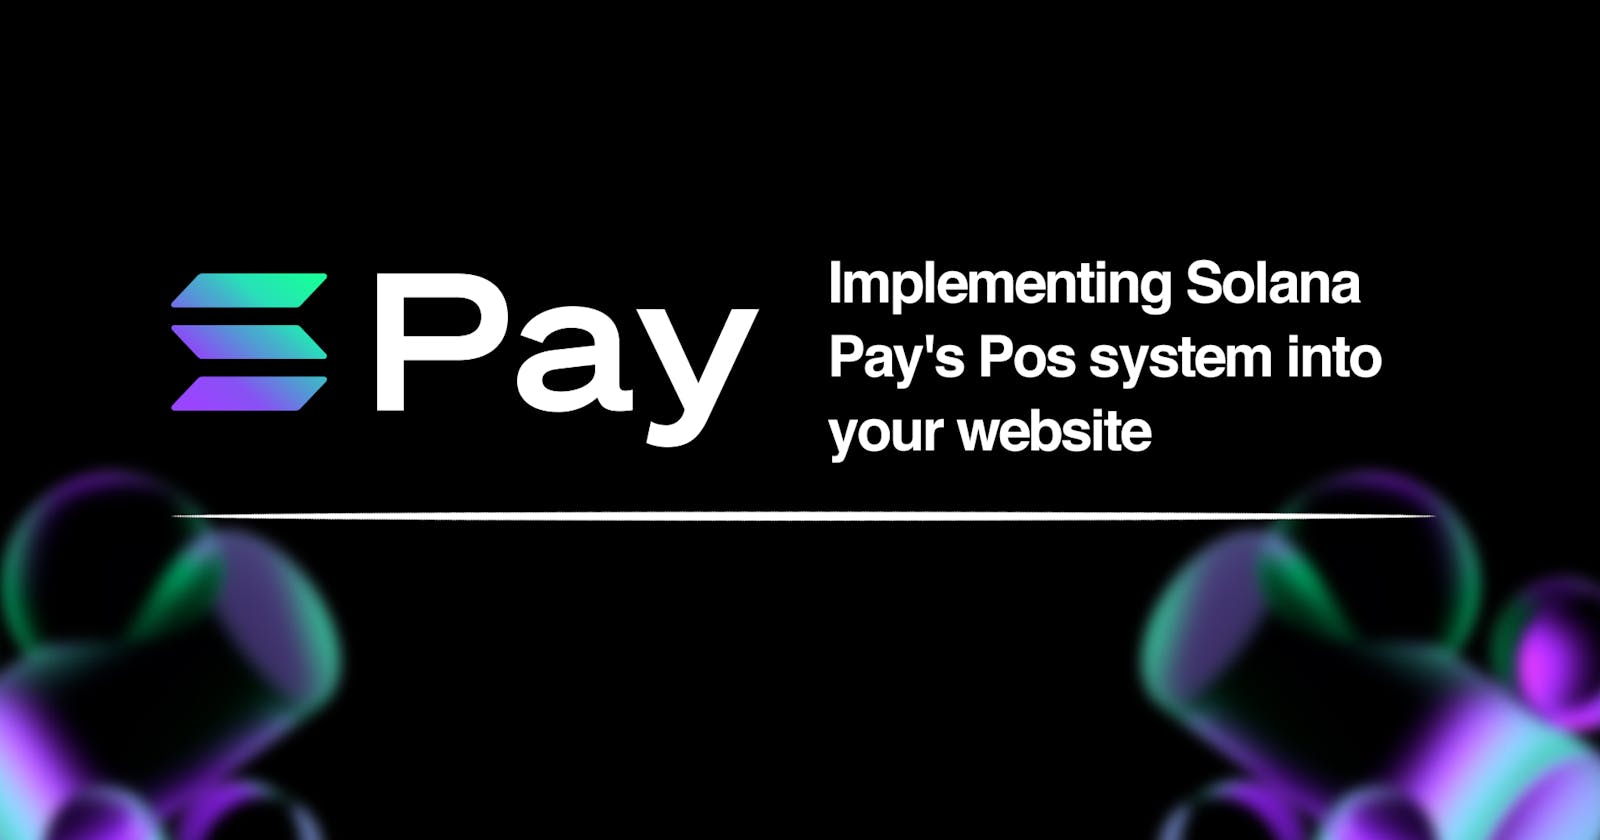 Implementing Solana Pay's Pos system into your website